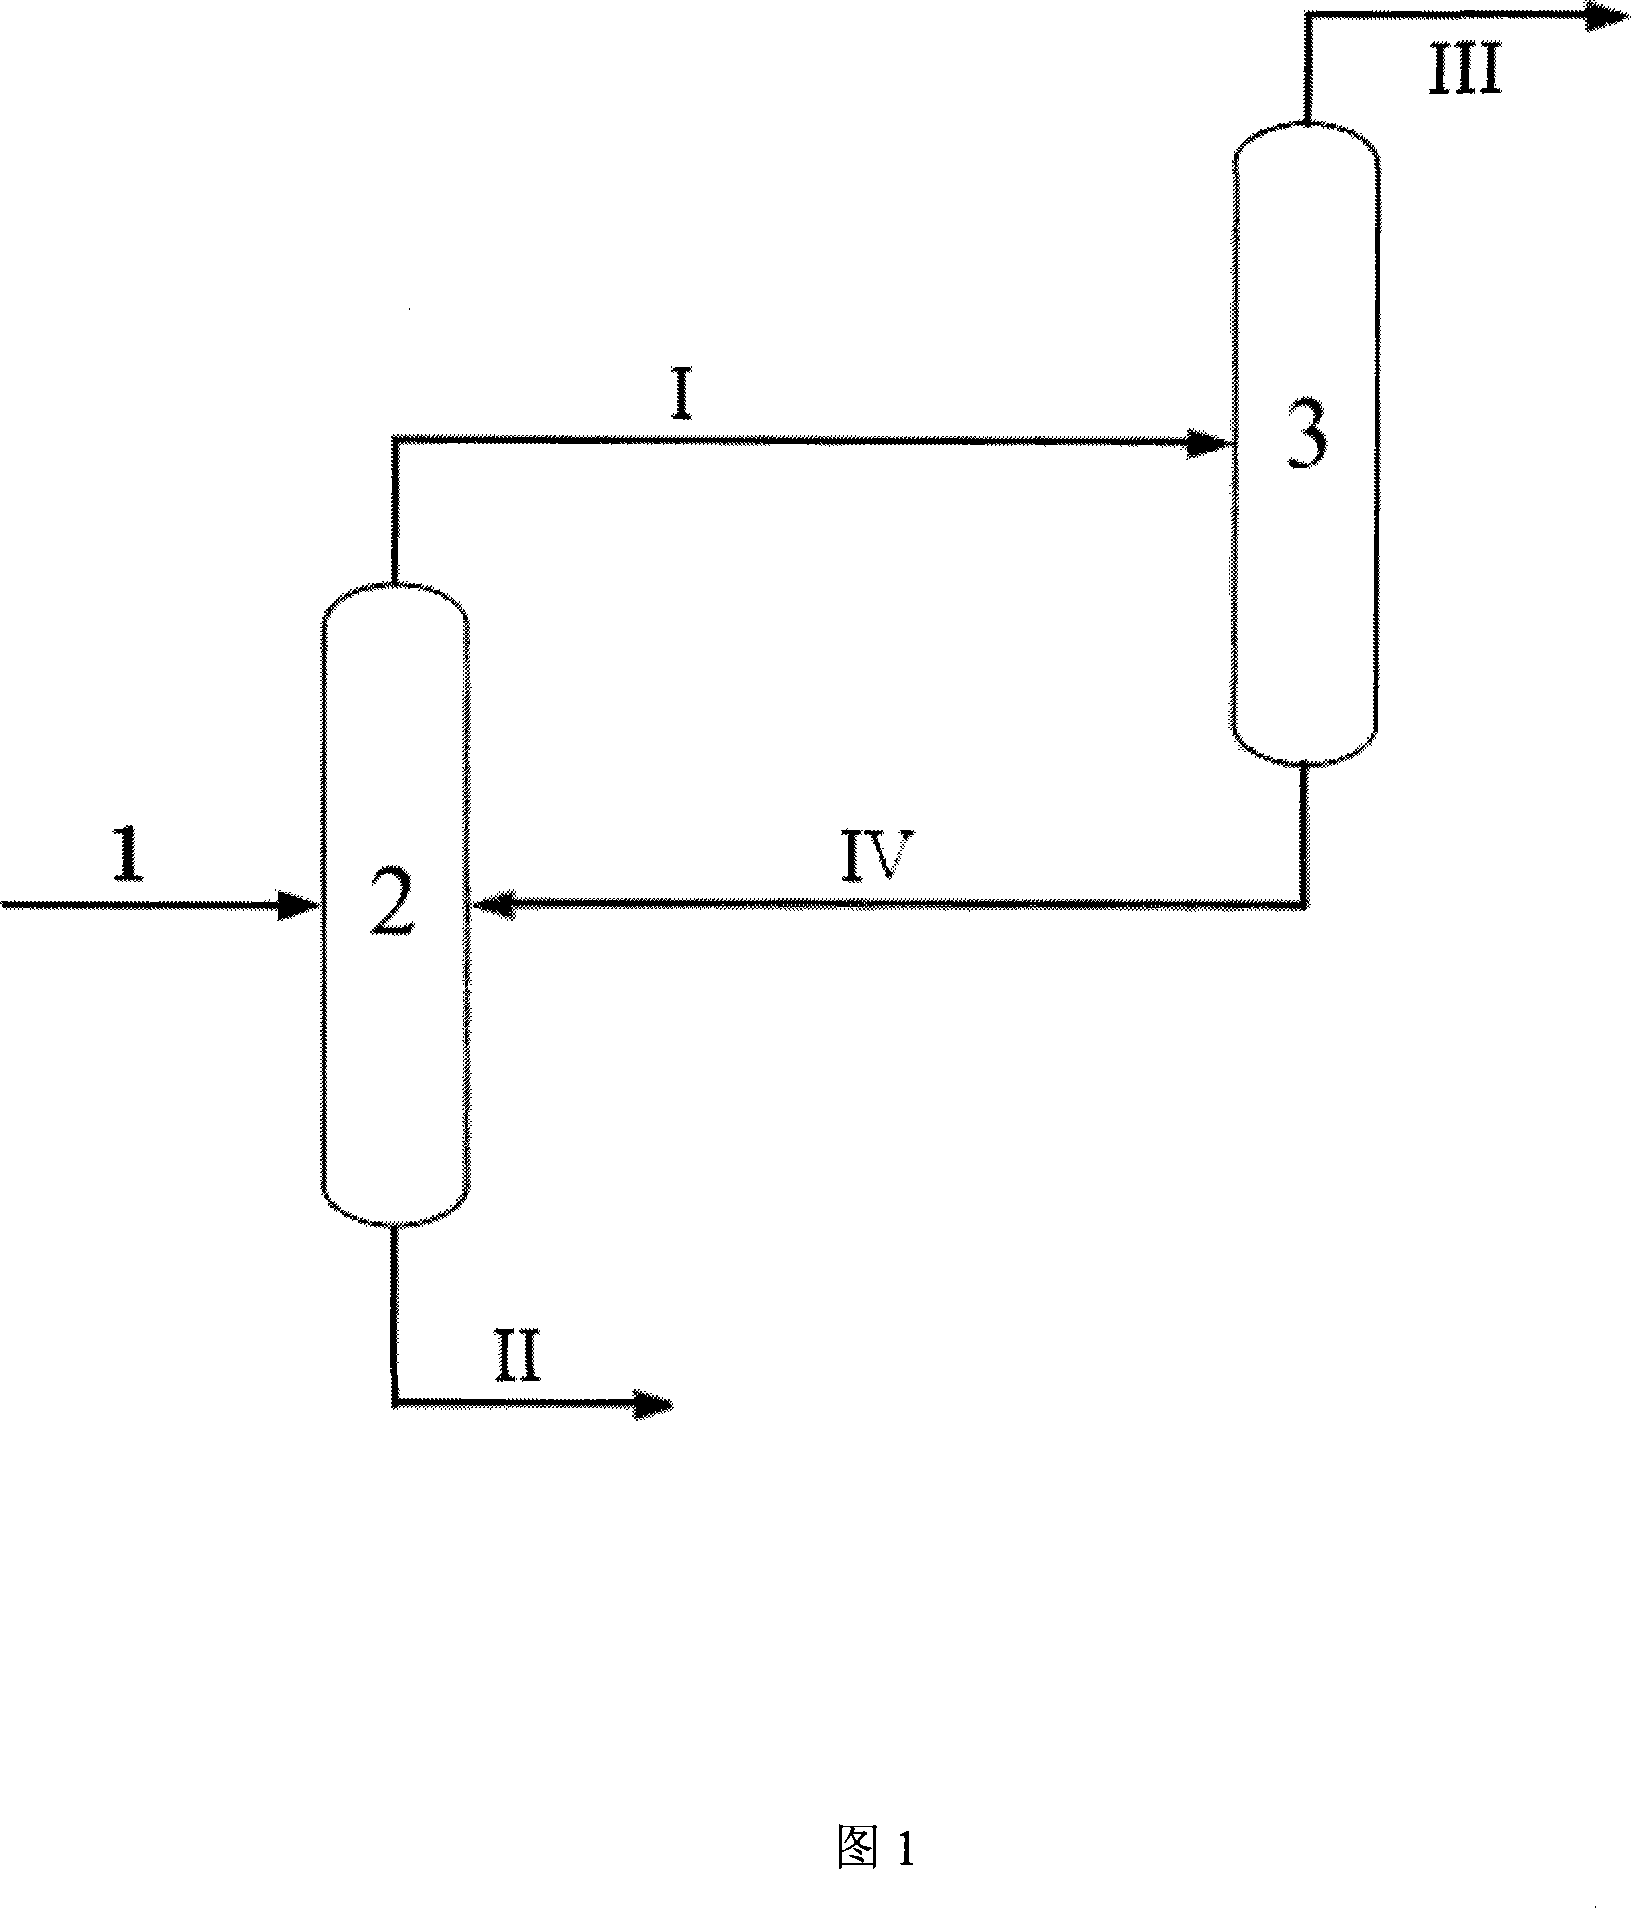 Method for separating isoprene by combined rectification